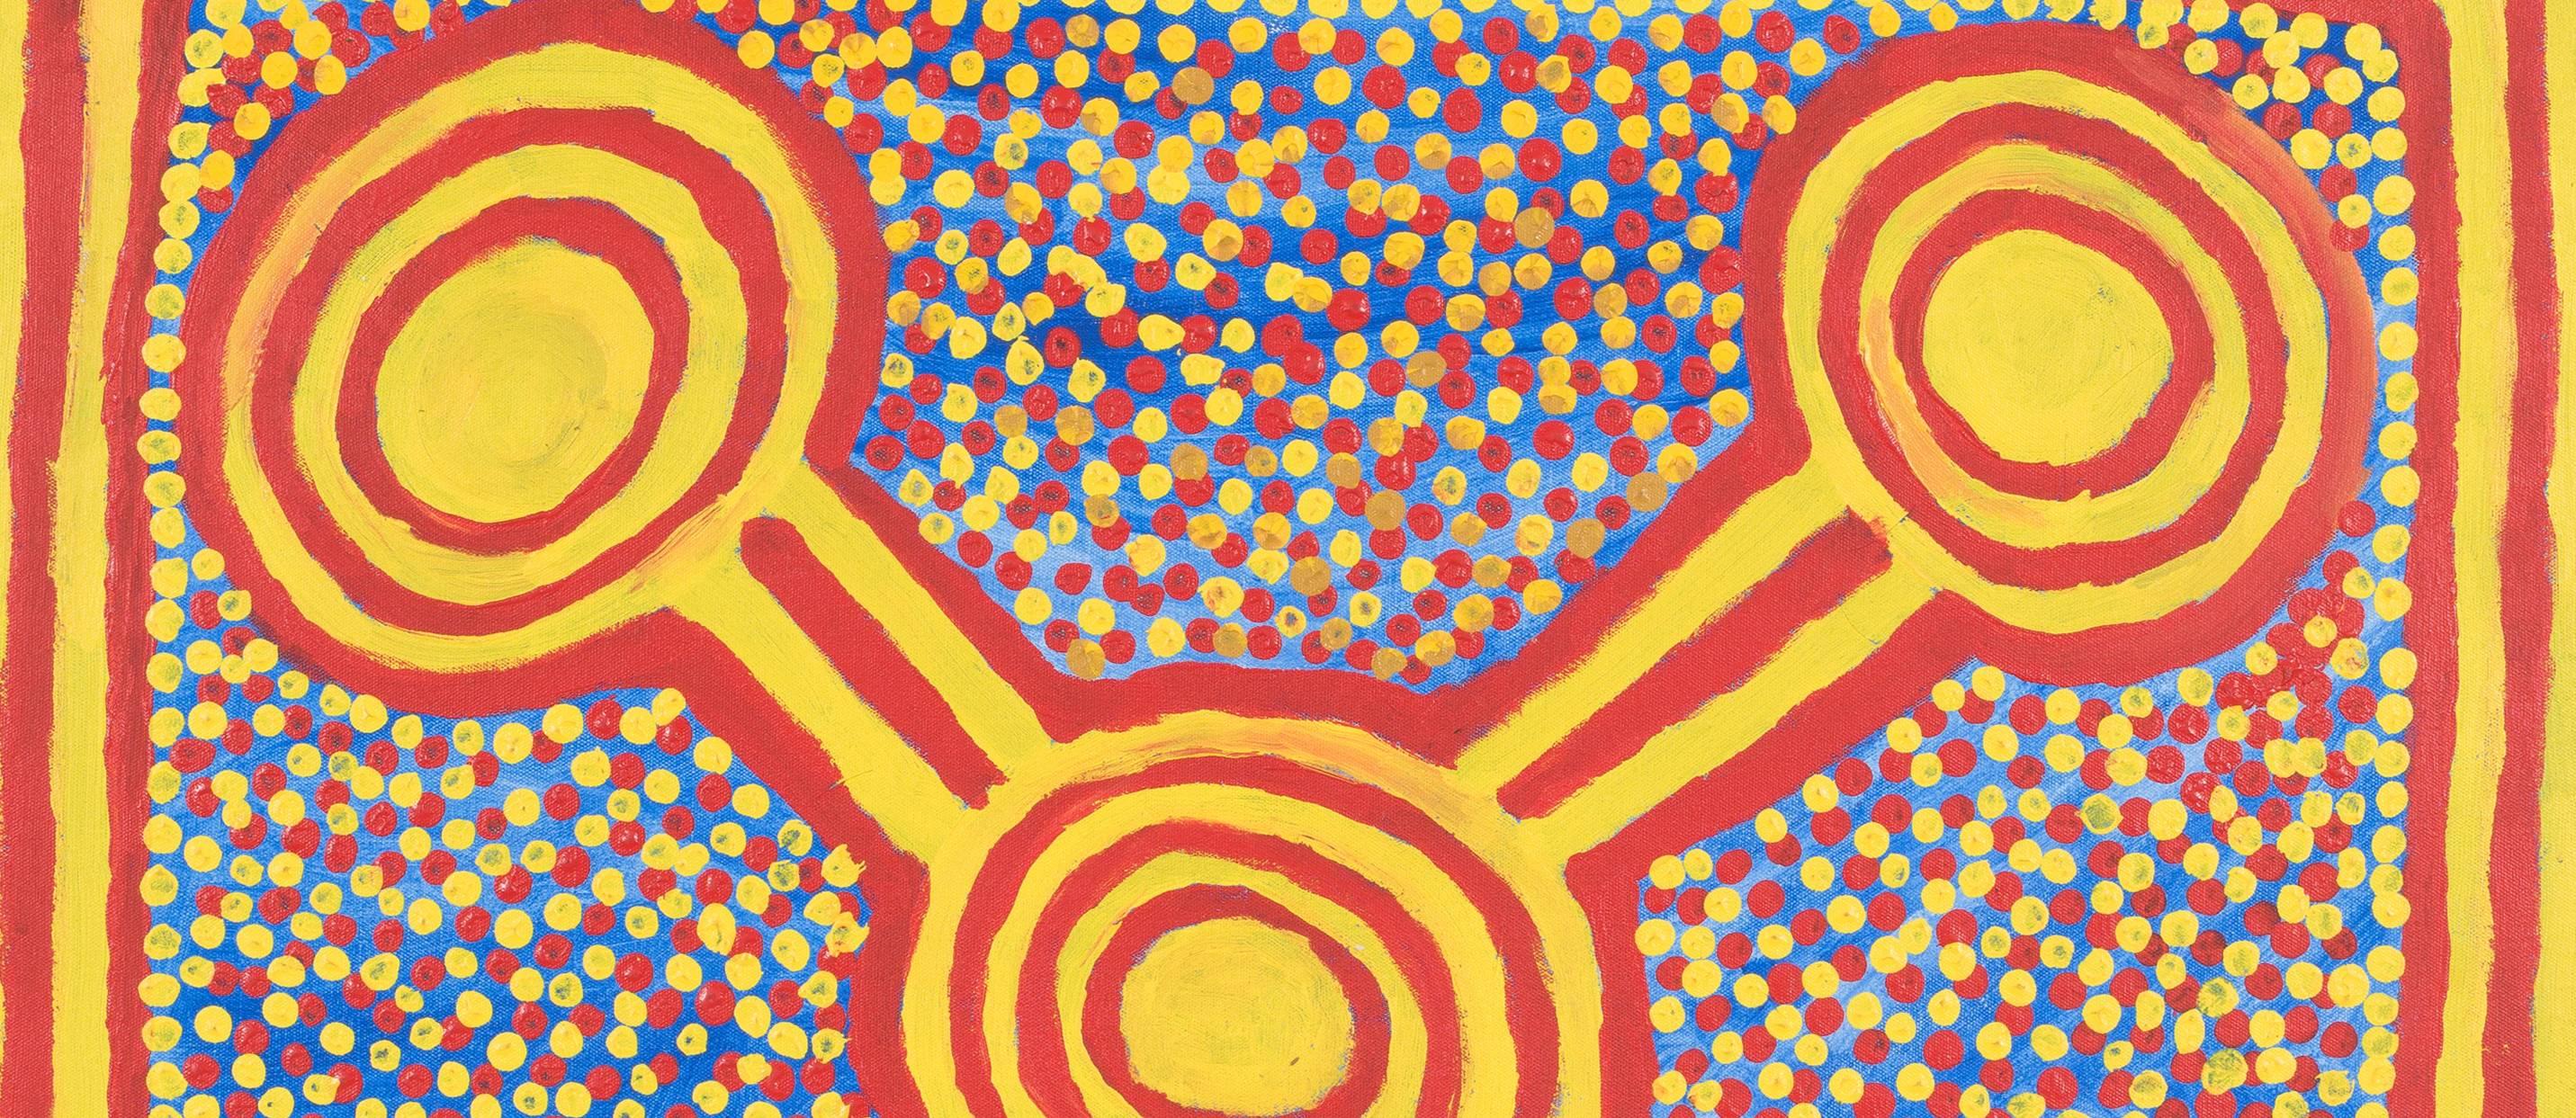 Pamarr Rockholes - Tribal Painting by Spider Snell